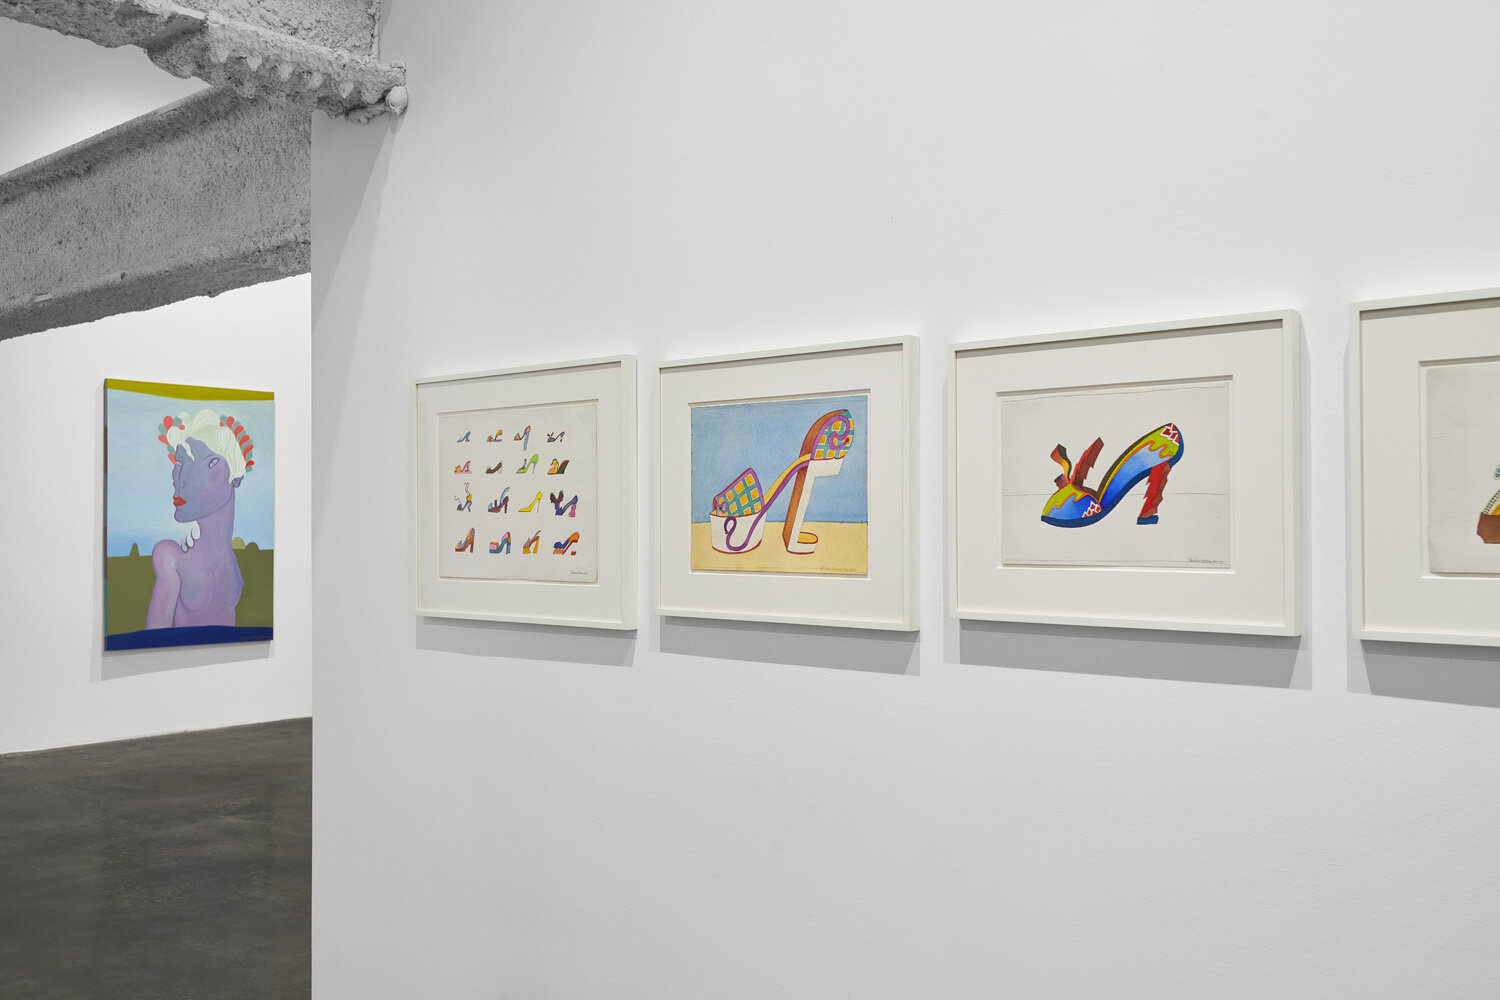  Back wall:  Joline  (2019)  Oil on canvas, 72” x 48”   Foreground left to right : Saw Heel + 15  (1969),  Plaid Platform  (1972),  Dark Blue Sole with Red Heel  (1971).    Ink and watercolor on paper, 16” x 12”   